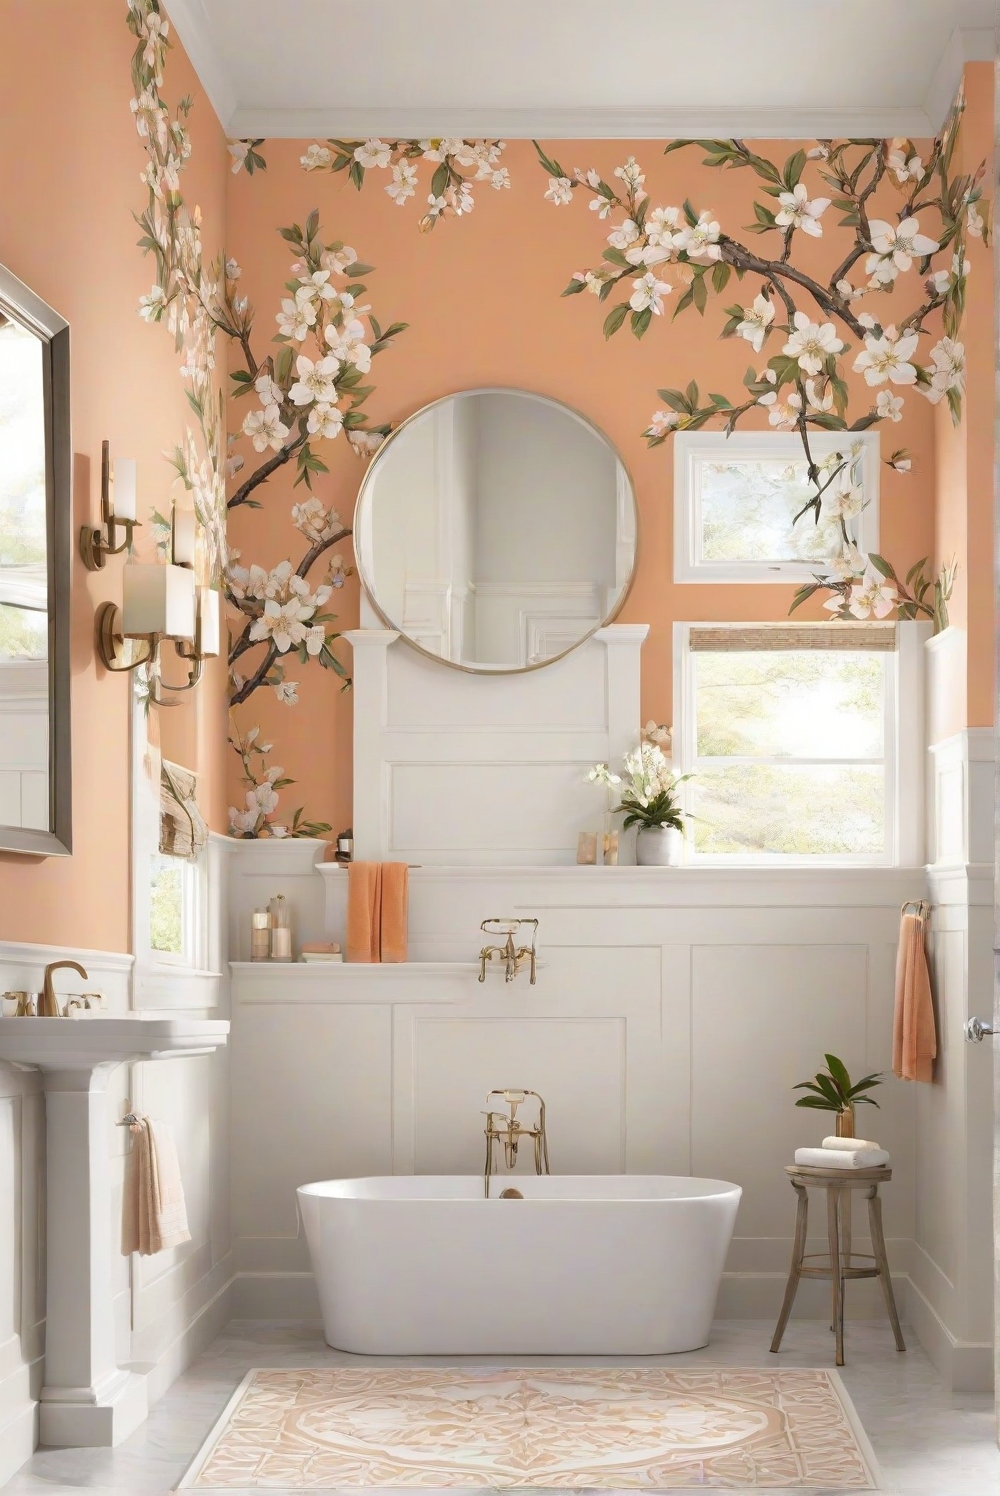 Orange Blossom Bliss, Floral Serenity, Bathroom Decor, Interior Design, Home Decor, Floral Design, Wall Paint, Kitchen Design, Living Room Décor, Space Planning, Color Matching Painting, Home Paint Colors.